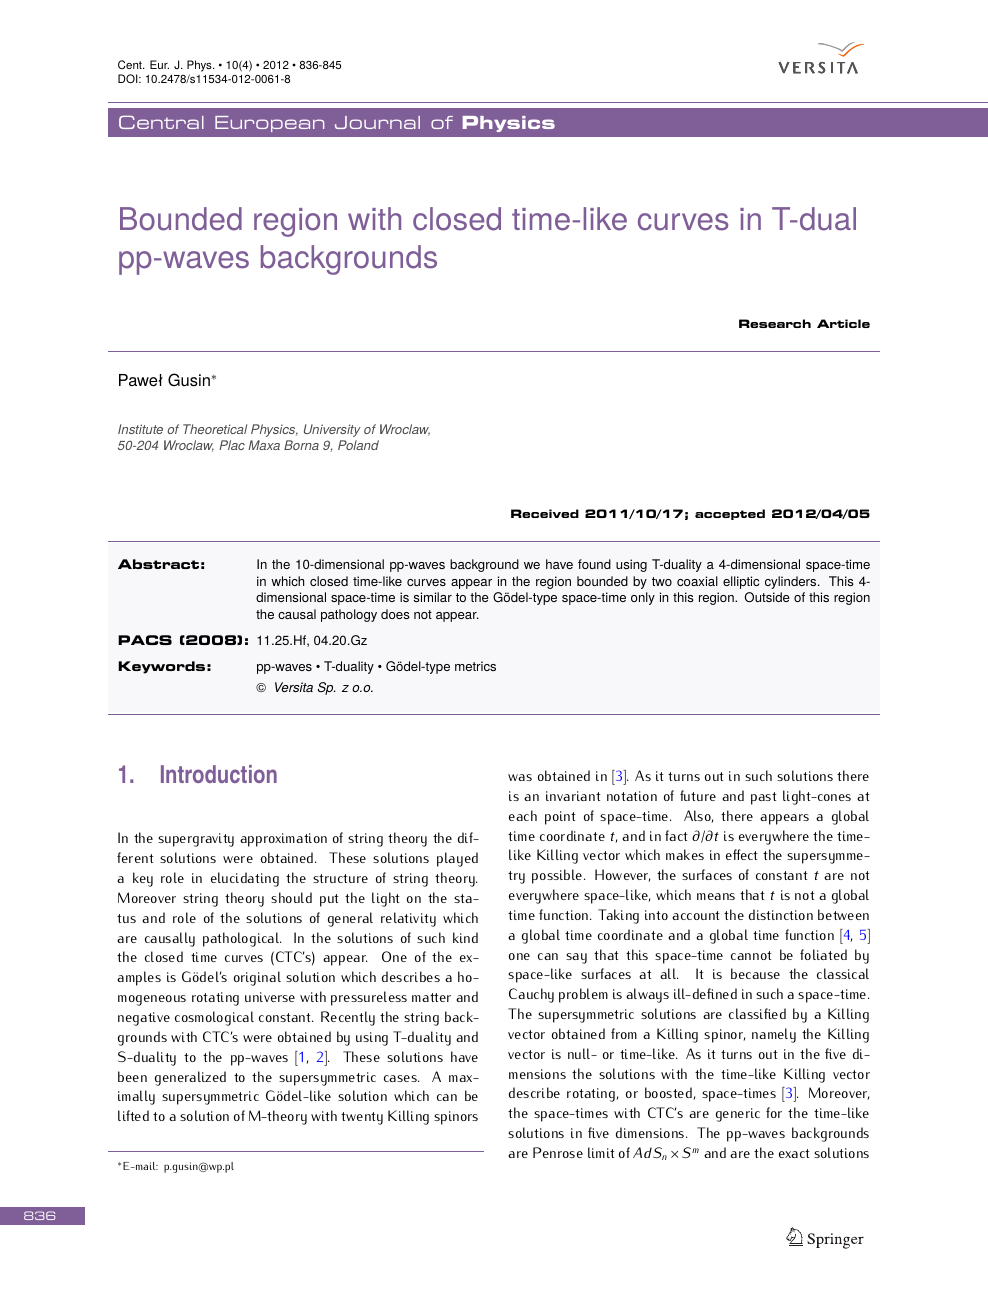 Bounded Region With Closed Time Like Curves In T Dual Pp Waves Backgrounds Topic Of Research Paper In Physical Sciences Download Scholarly Article Pdf And Read For Free On Cyberleninka Open Science Hub